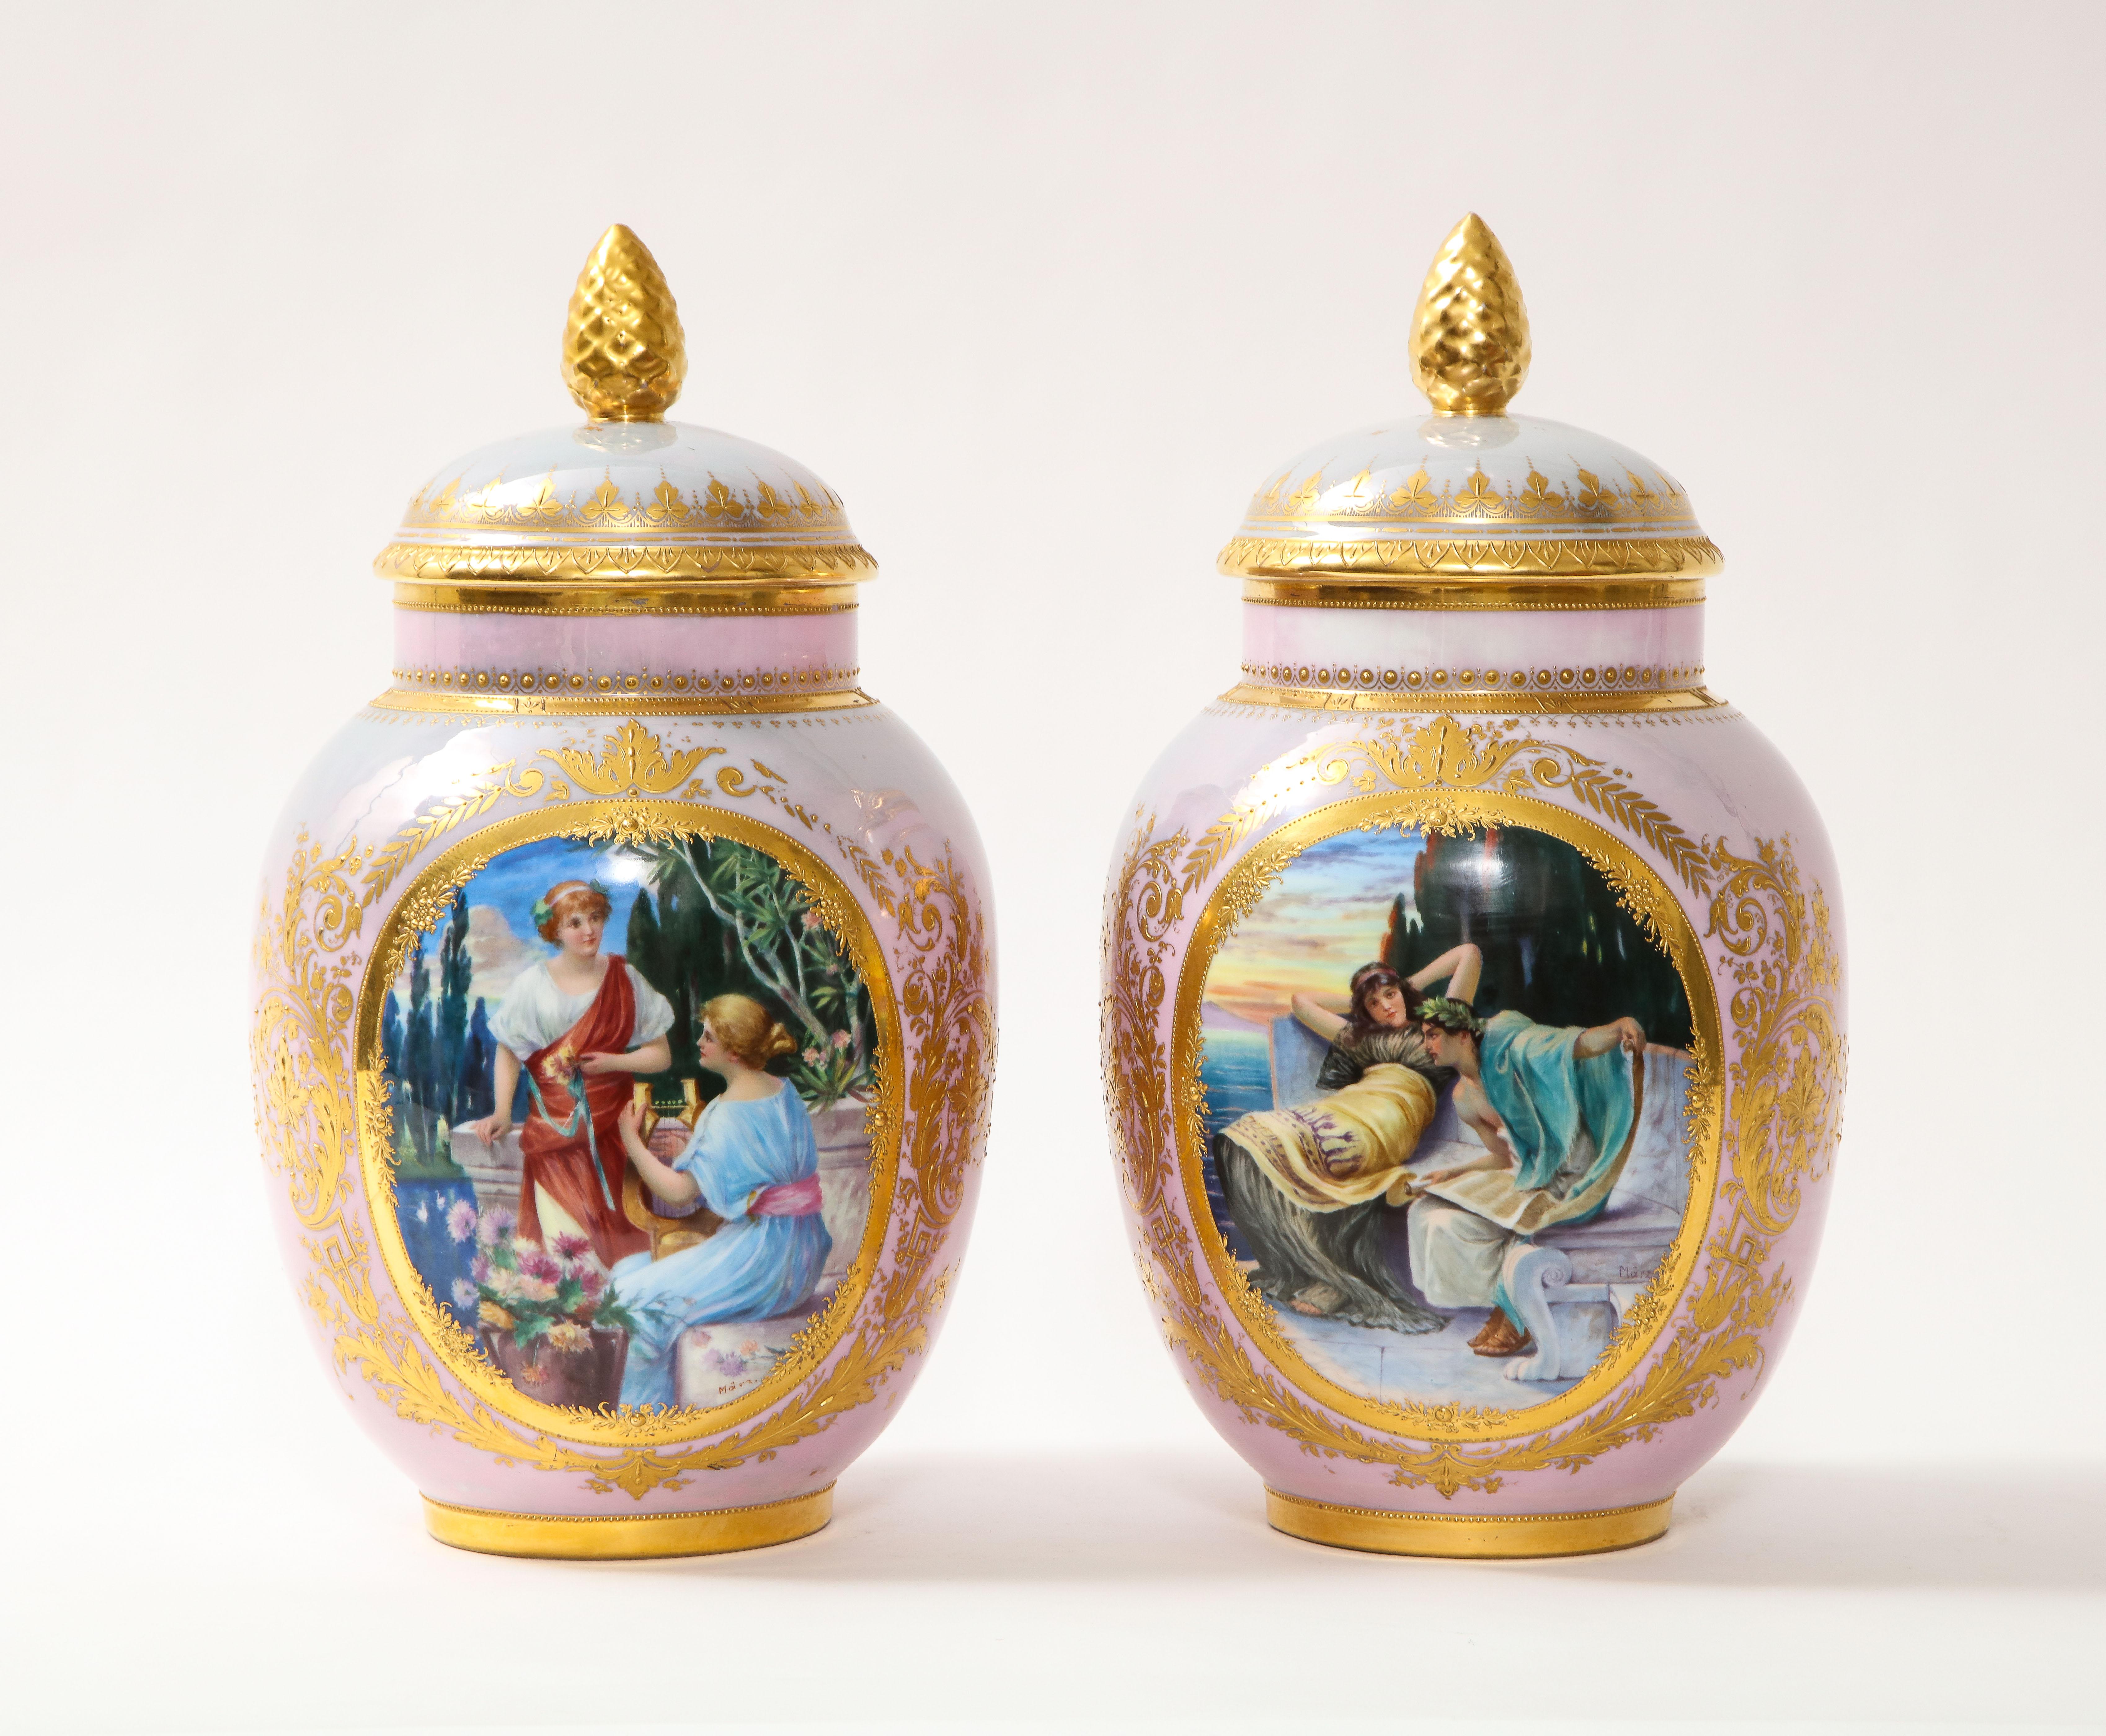 A pair of 19th century Louis XVI Style Royal Vienna Porcelain Iridescent pink vases with neoclassical scenes. Of rounded form these covered vases are spectacular. Each has a particular pink iridescent glow that shines in all lights. They have